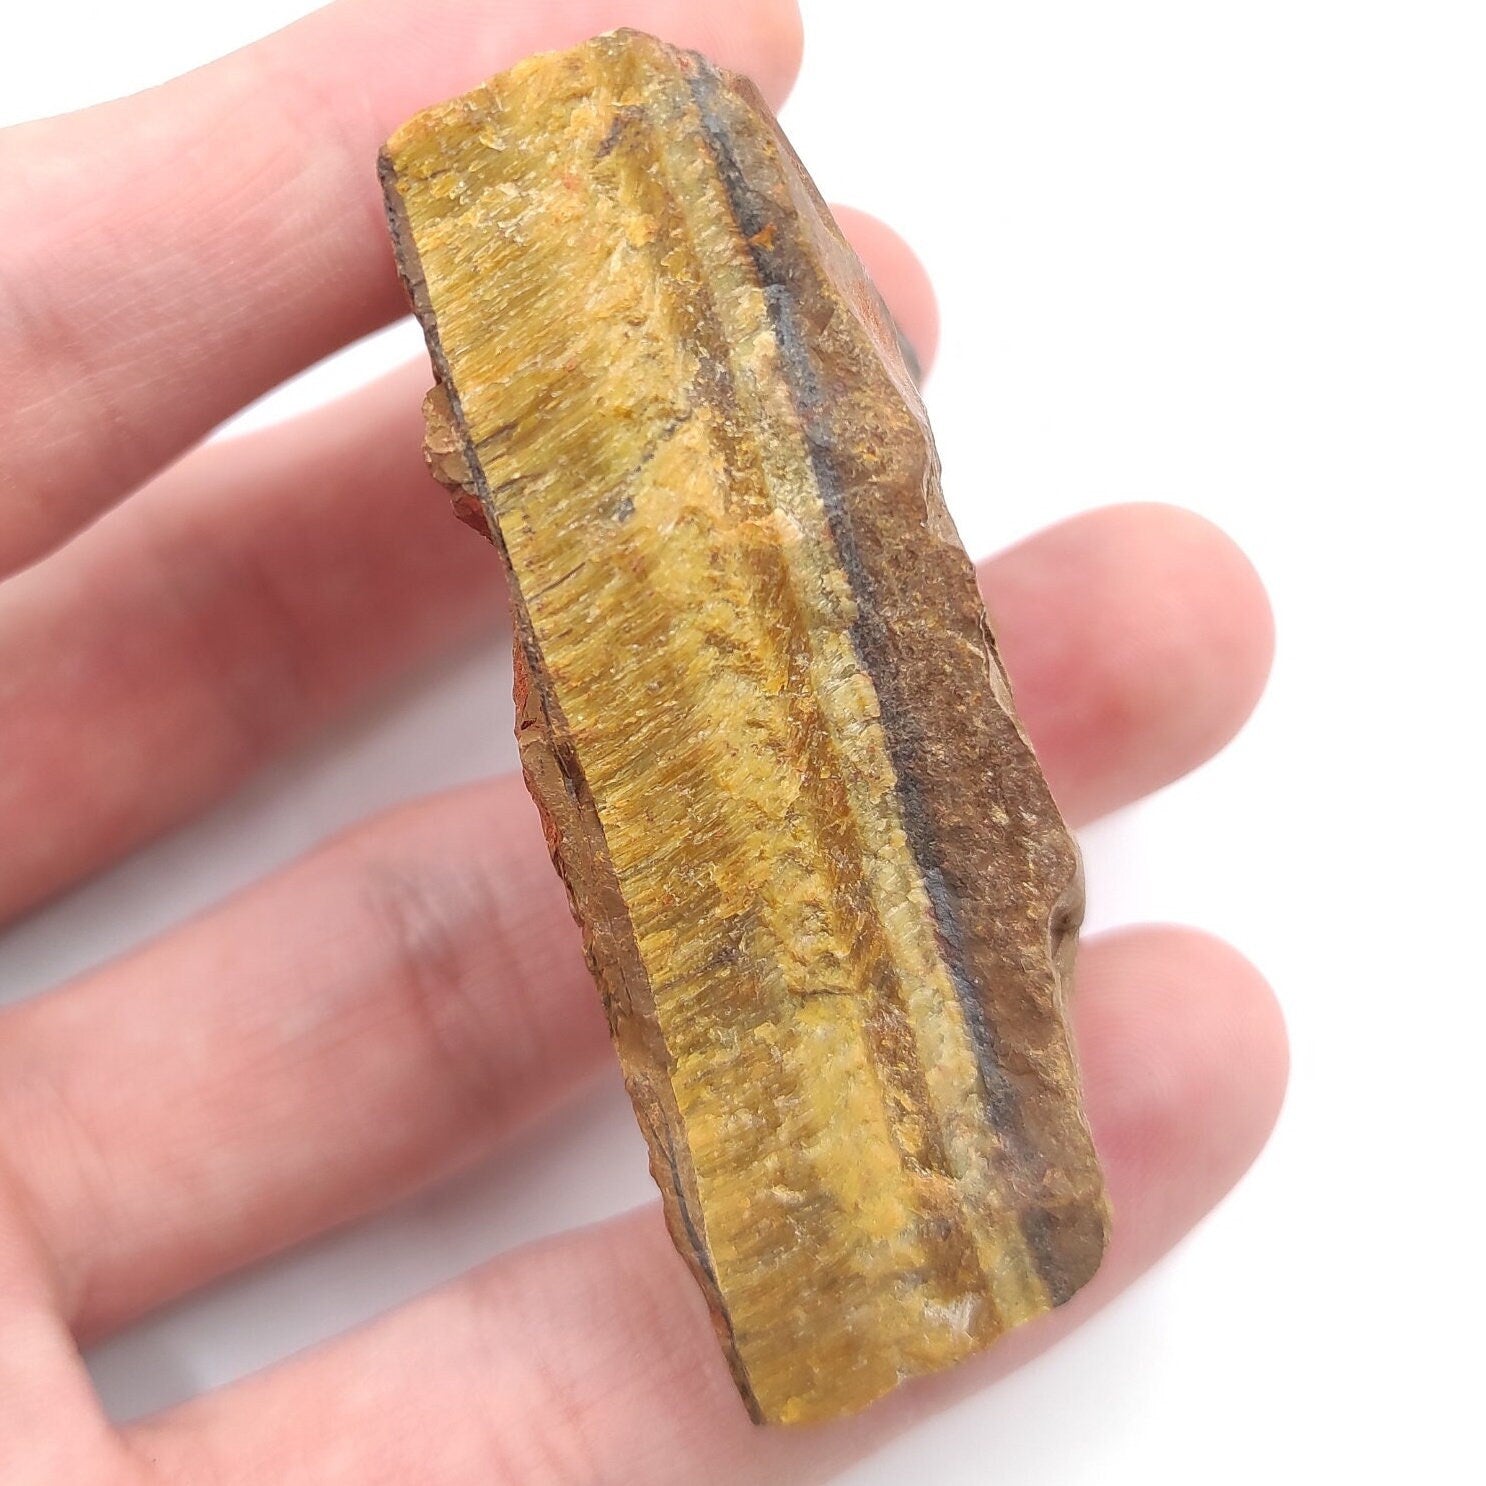 80g Rough Tiger Eye Stone - Raw Tiger's Eye Crystal - Natural Tiger Eye Piece from South Africa